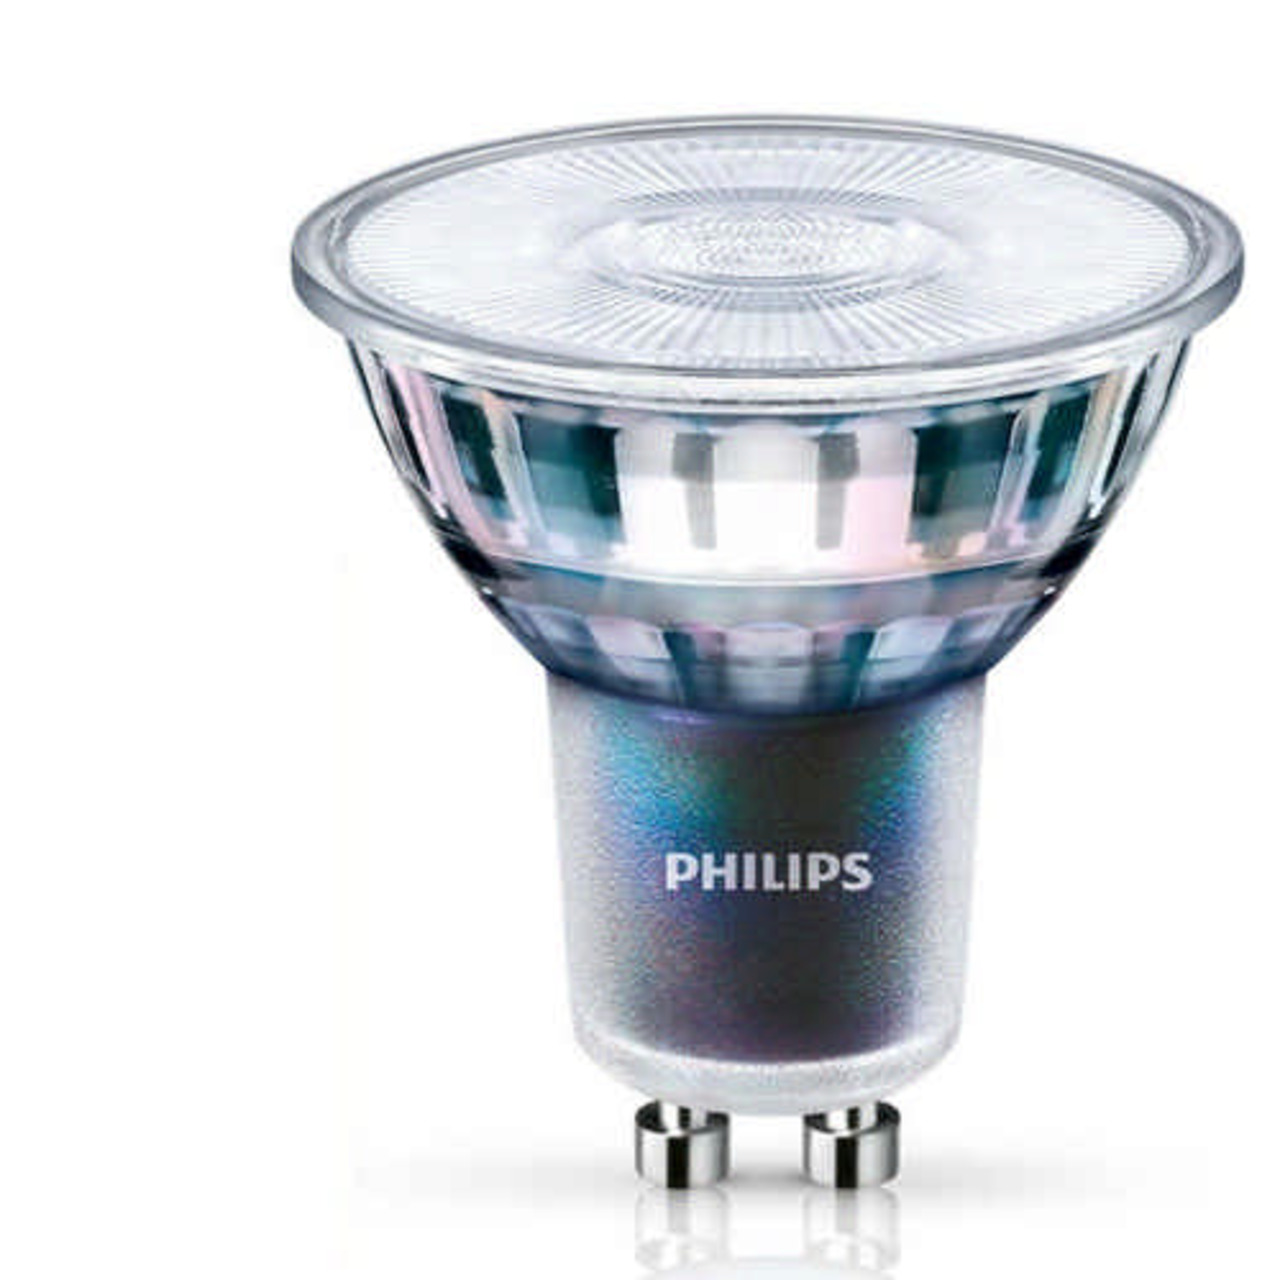 Philips MASTER ExpertColor 5-5-W-GU10-LED-Lampe- 375 lm- 97 Ra- 36- 3000K- neutralweiss- dimmbar